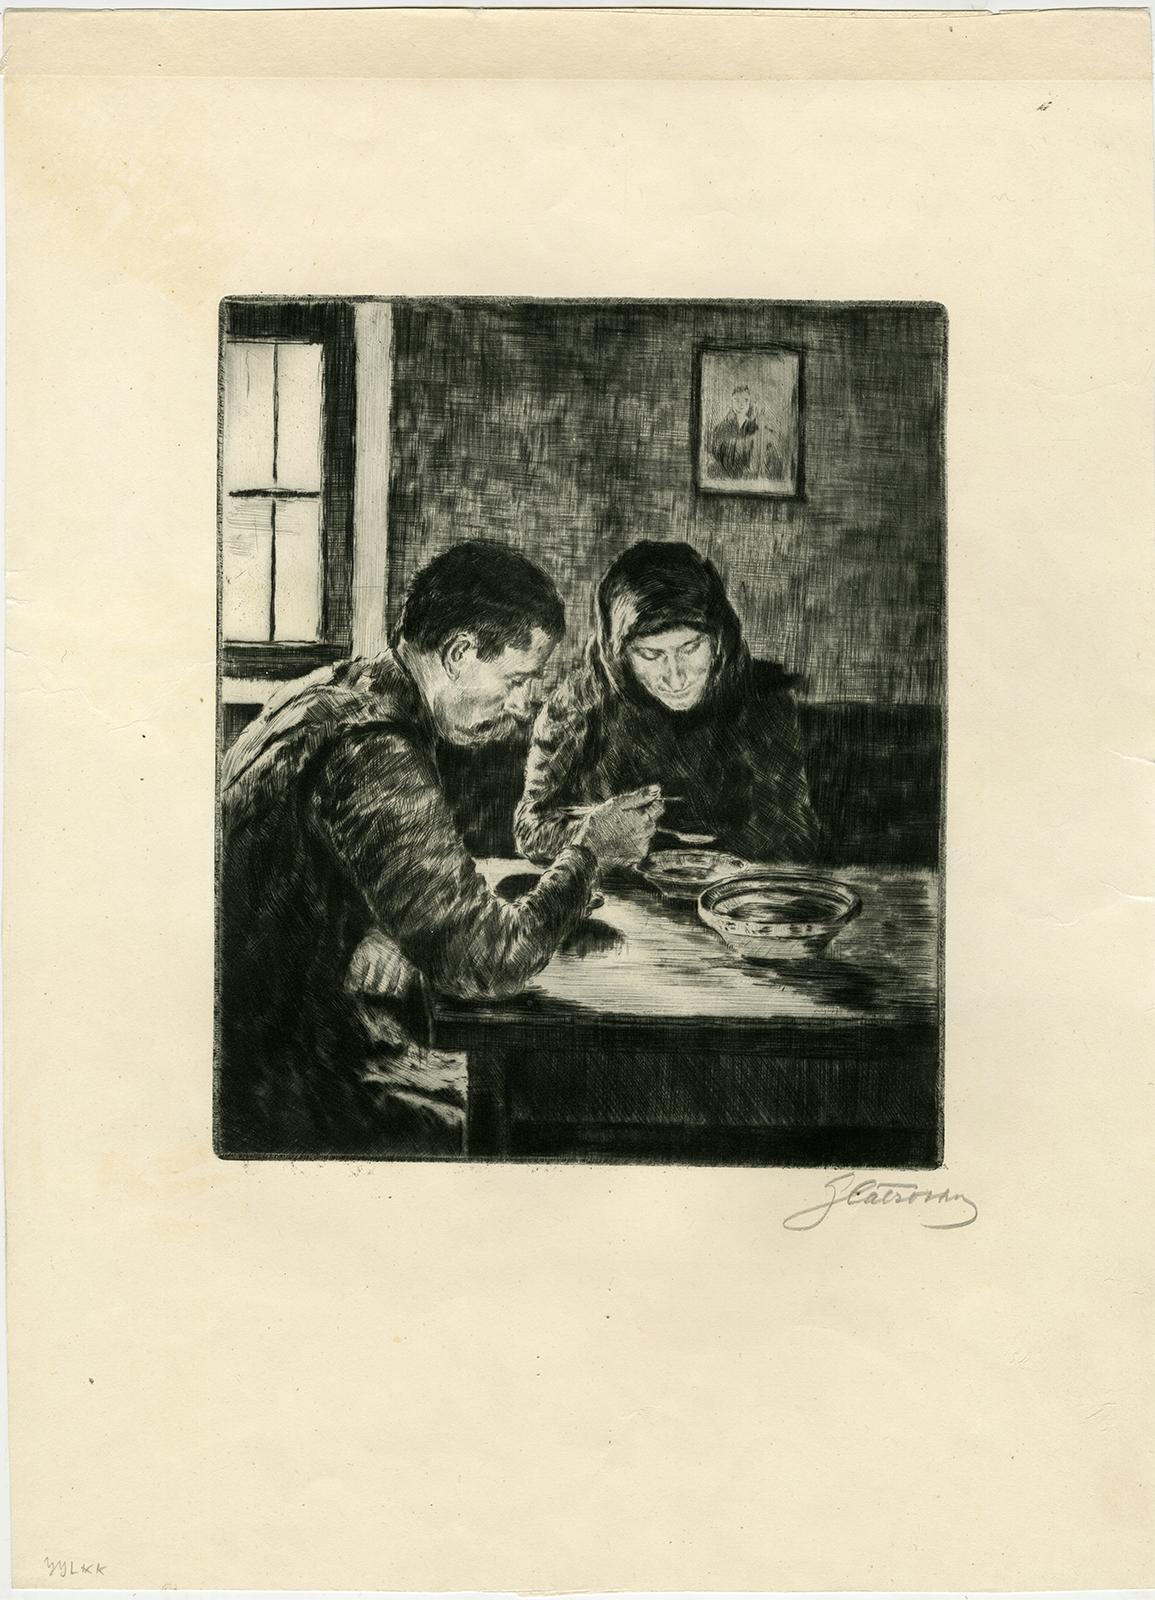 Subject: Antique Master Print, untitled. A man and woman at breakfast. Very good impression by this Hungarian artist. Signed in pencil.
 
 Description: Source unknown, to be determined.
 
 Artists and Engravers: Made by 'Oszkar Glatz' after own